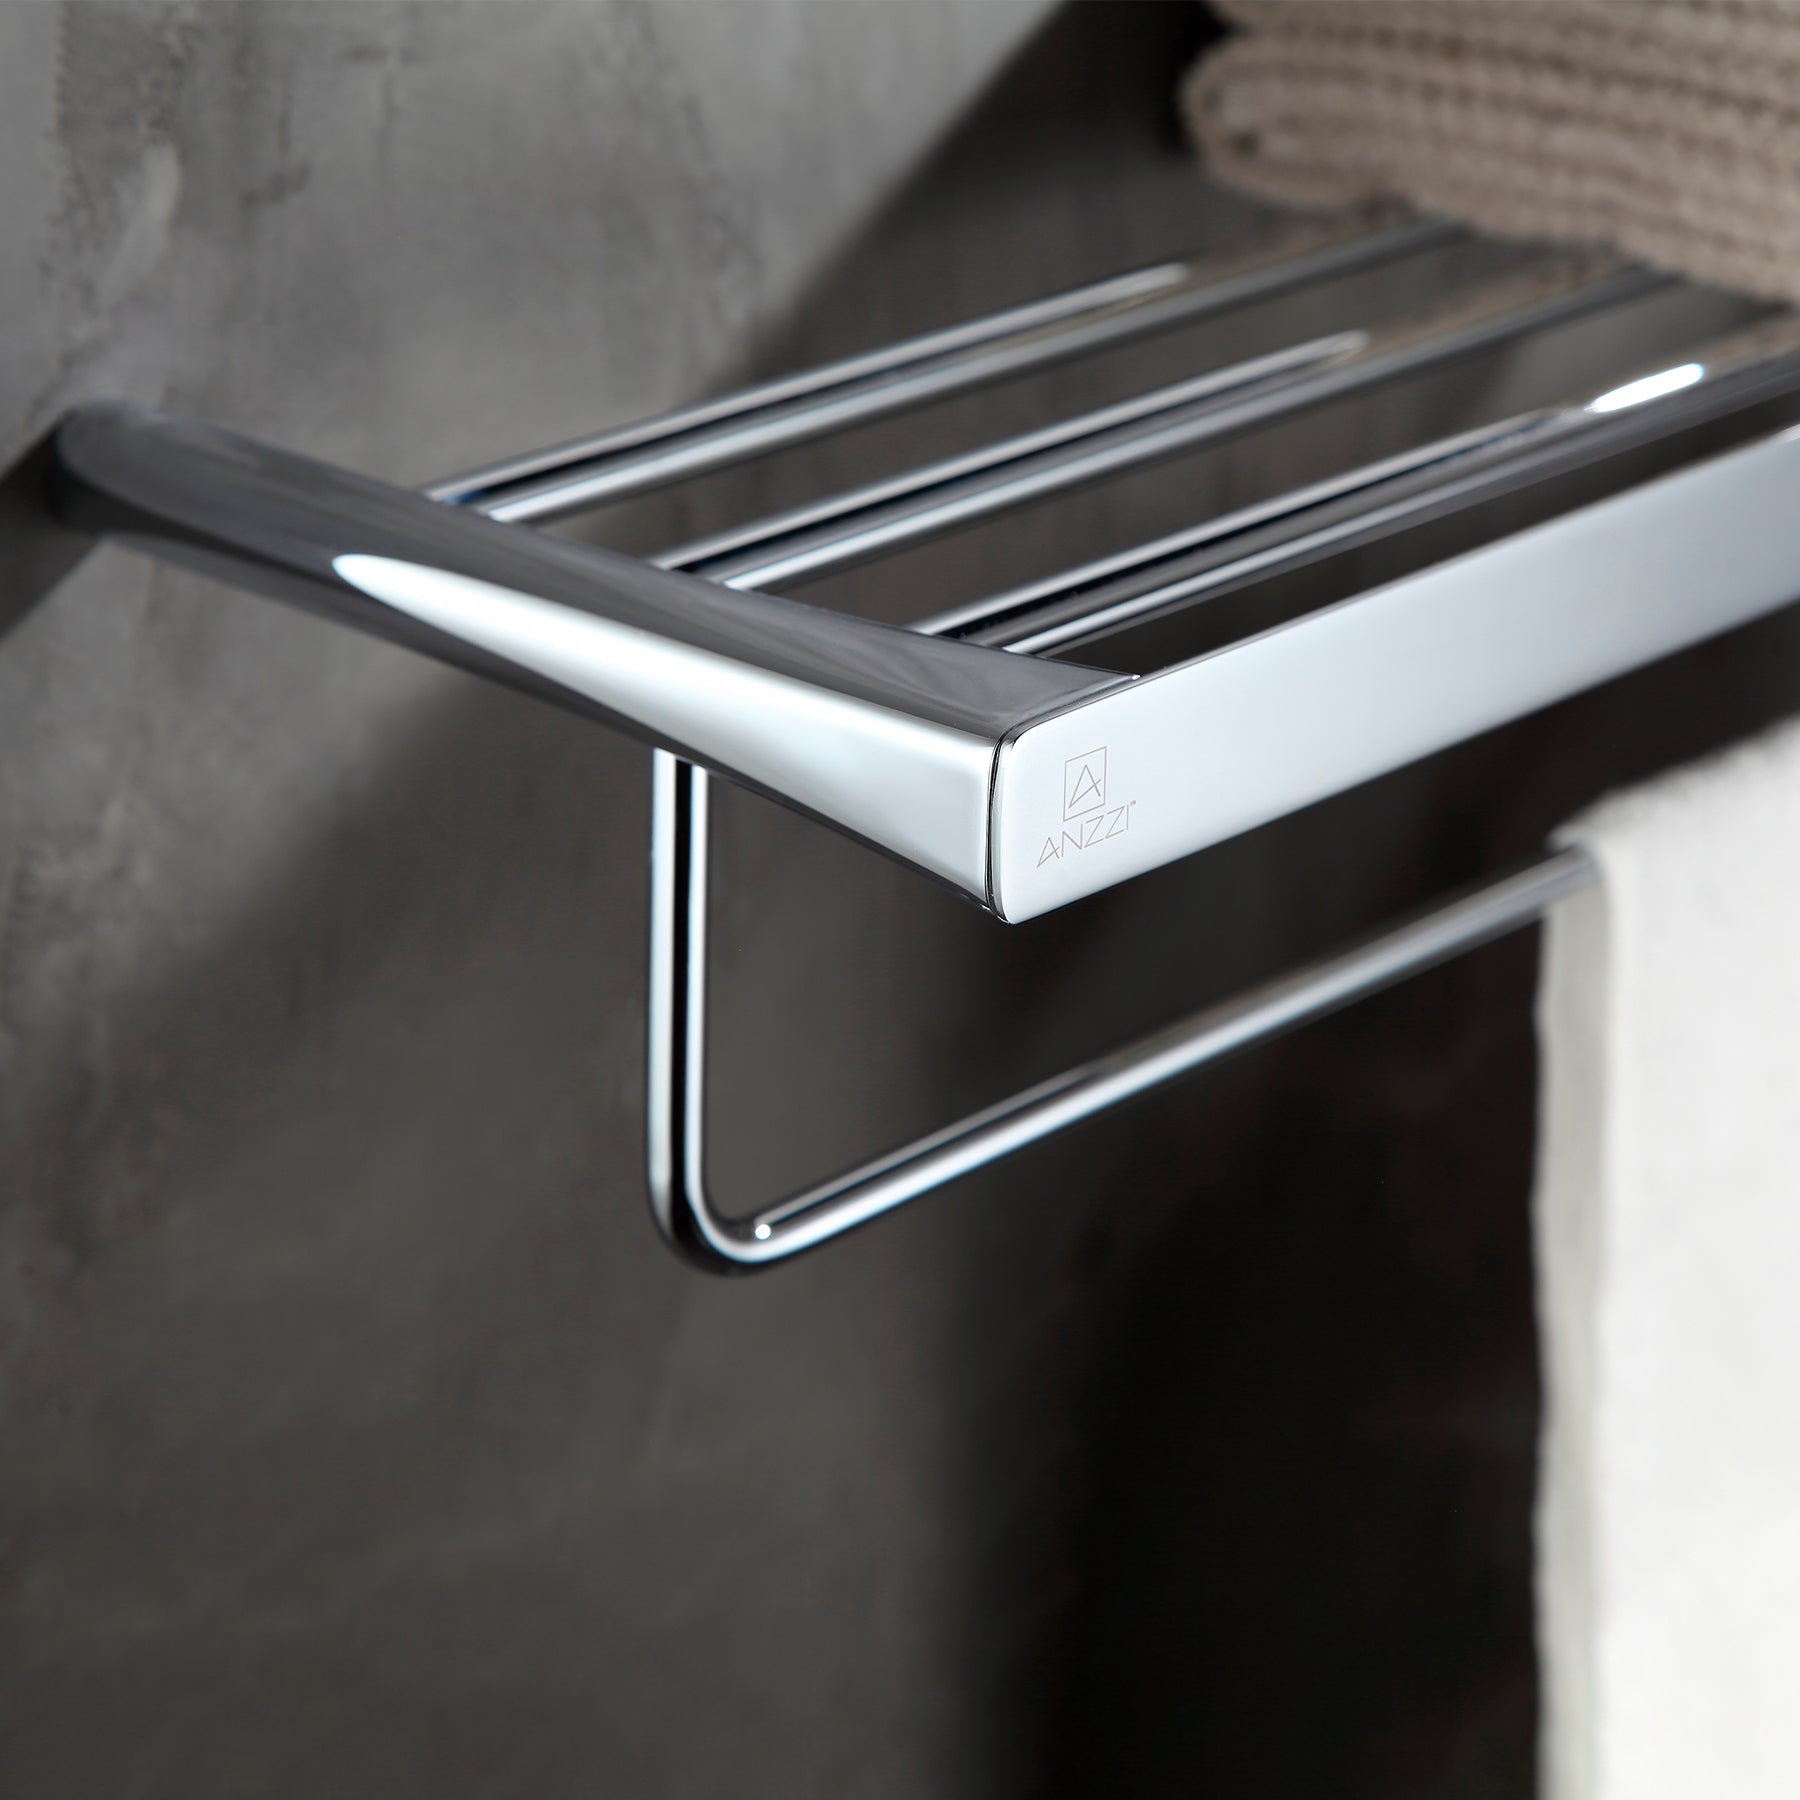 Caster 3 Series 5 Bar Wall Mounted Towel Rack in Polished Chrome